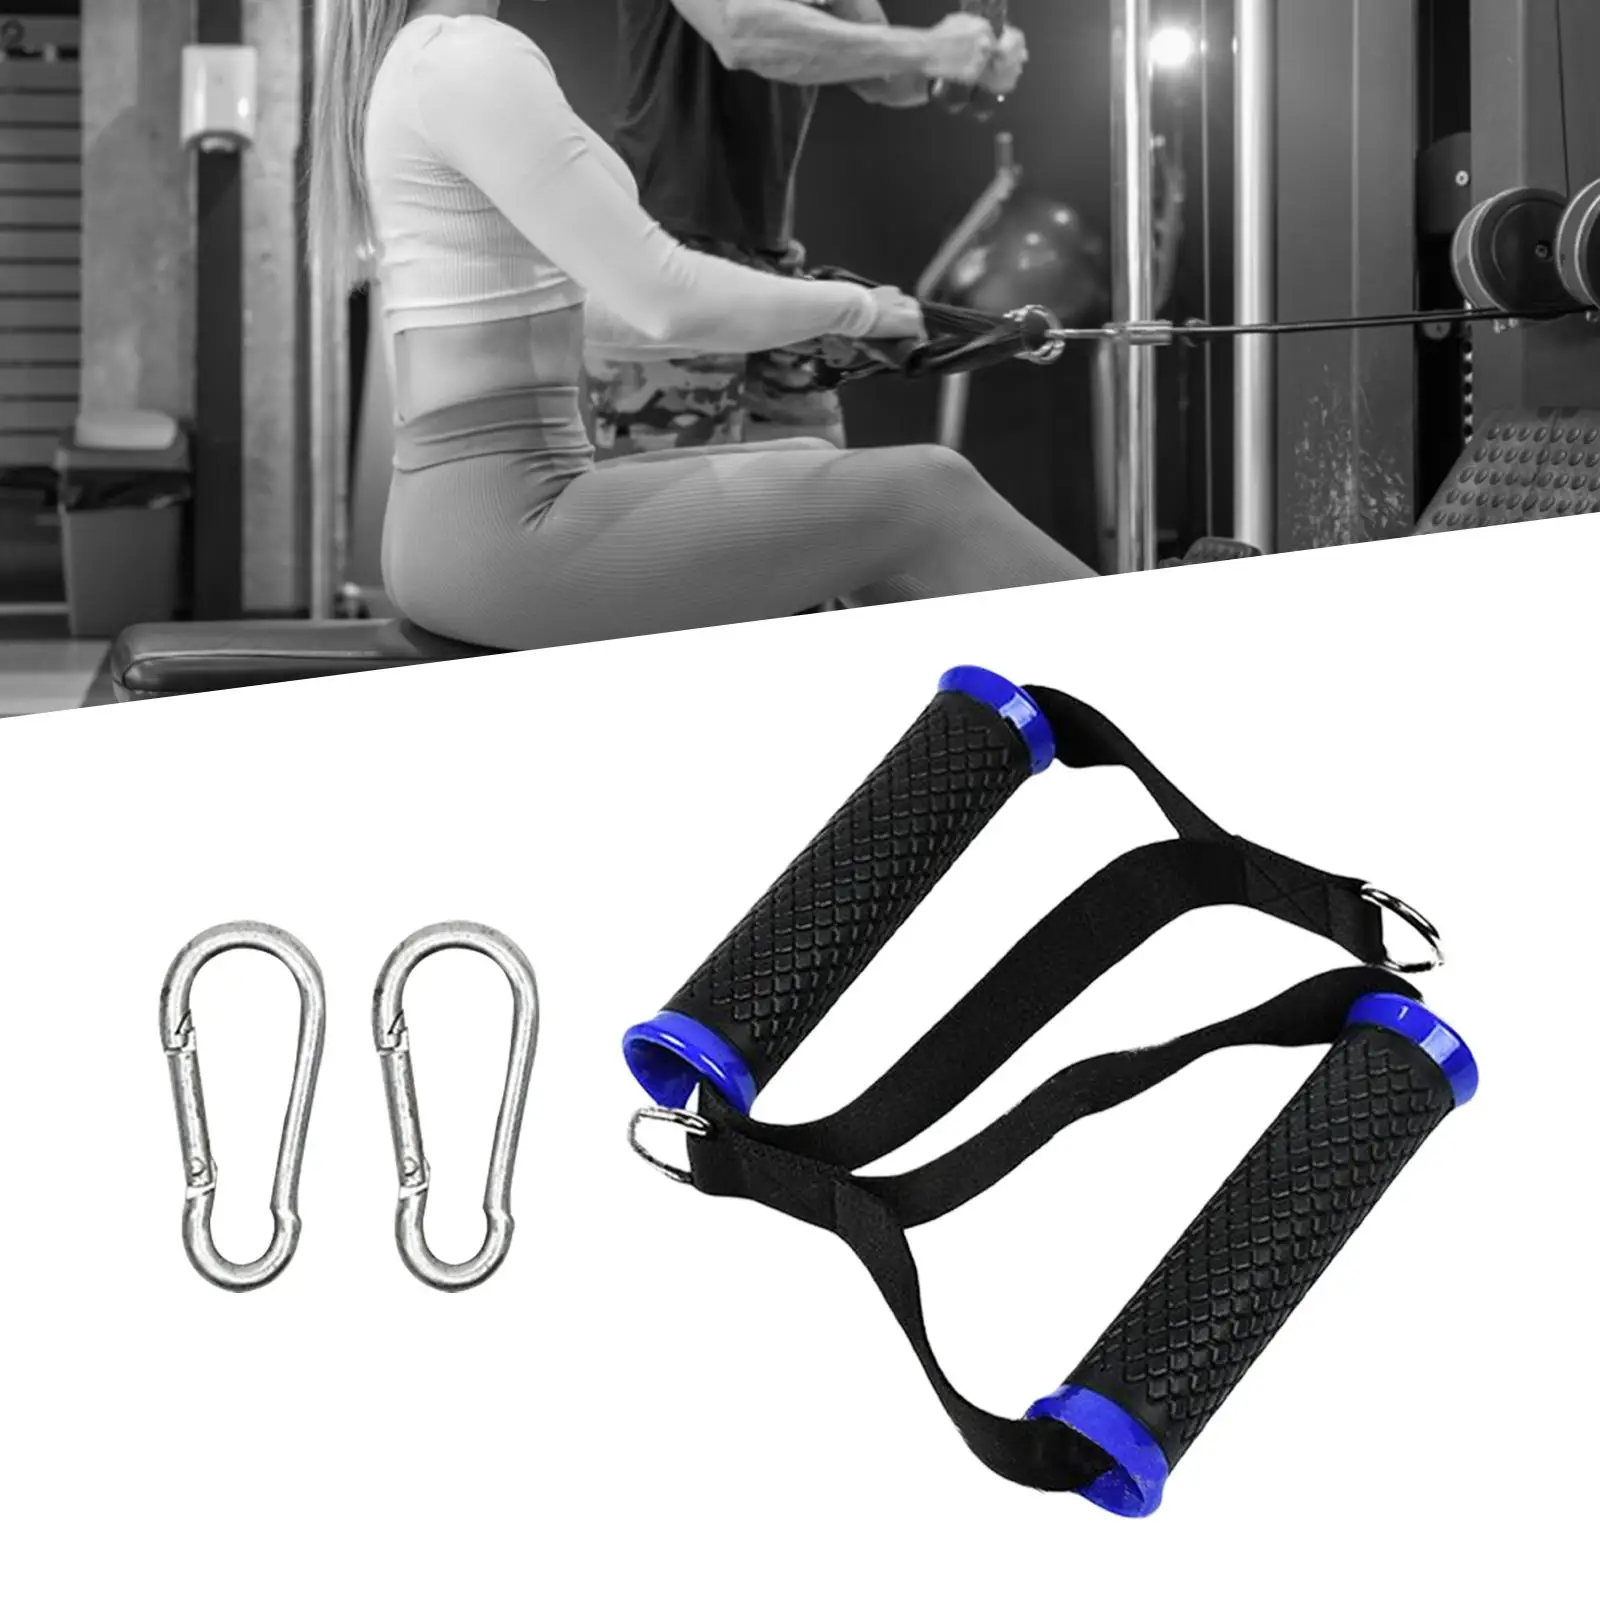 2 Pieces Universal Cable Machine Attachment Handles Nylon Equipment LAT Row Bar for workout Workout Strength Training Pilates